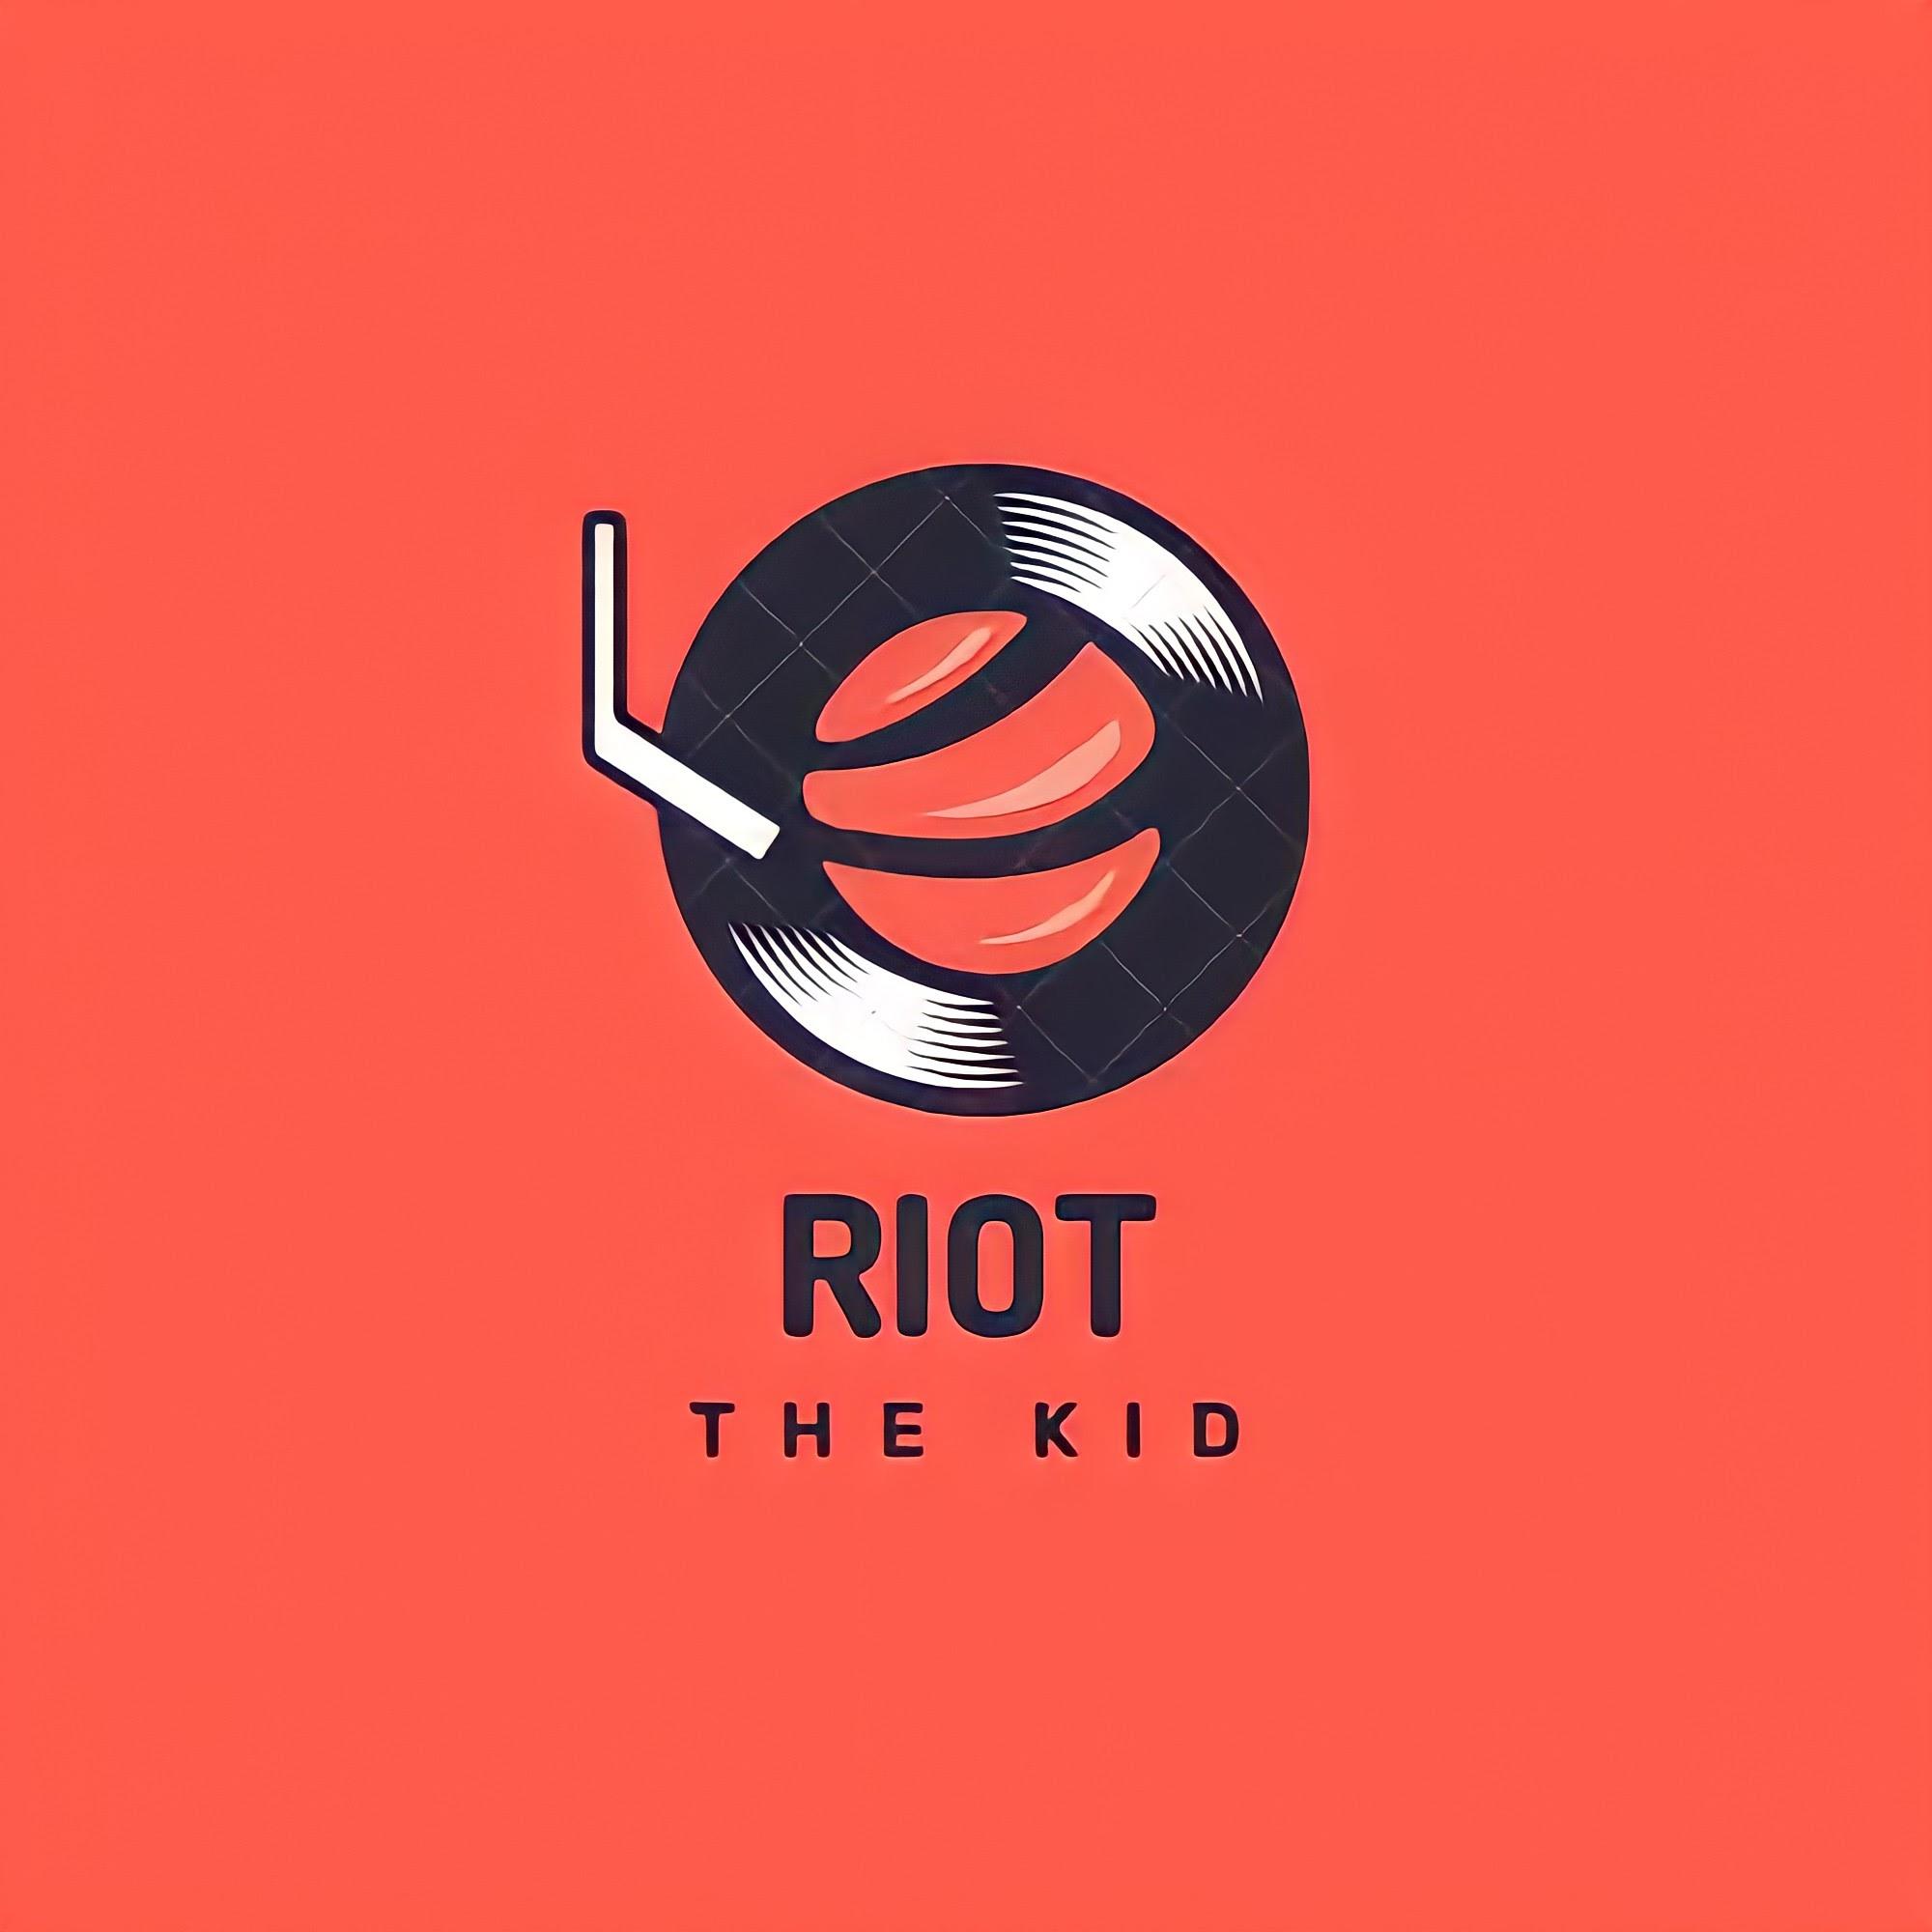 Riot the kid